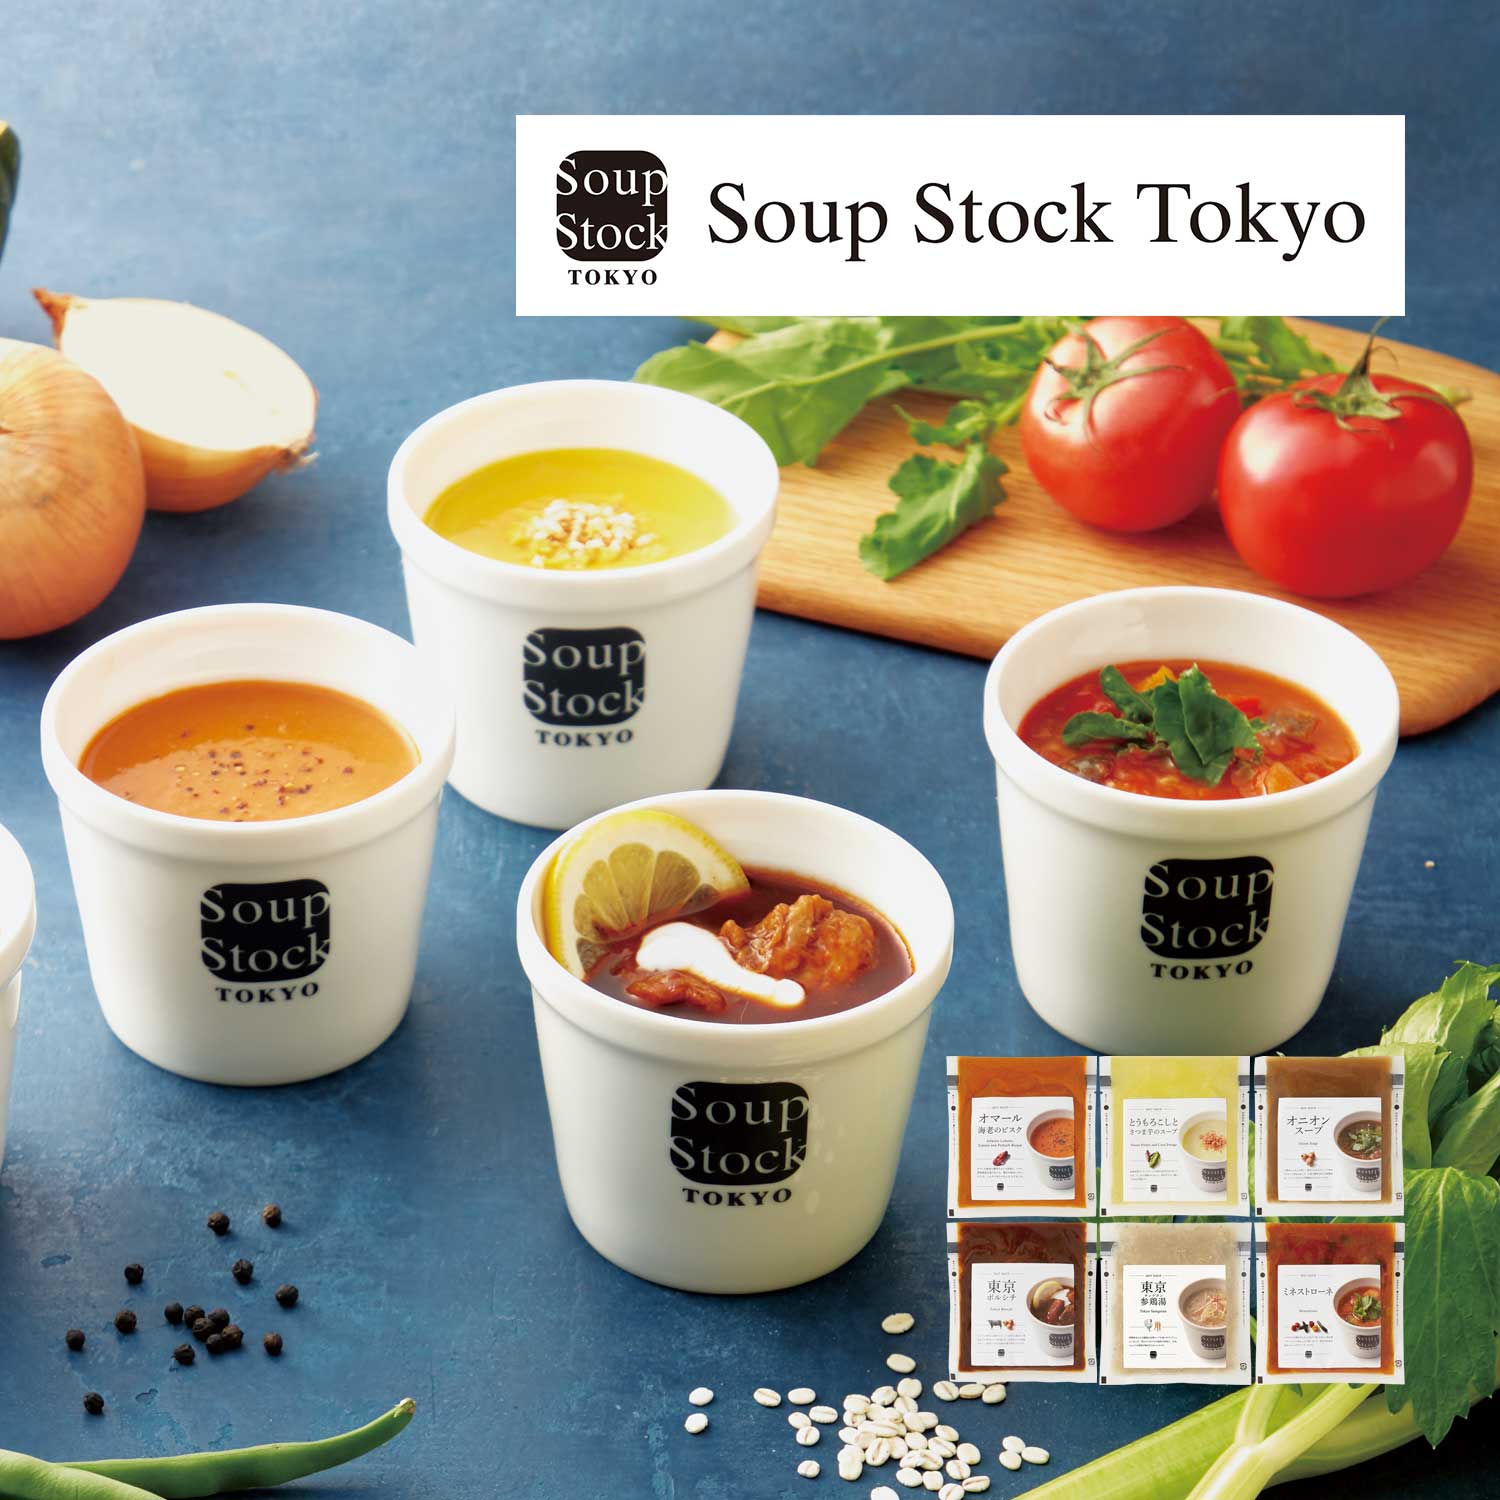 Tokyo)｜通販のベルメゾンネット　定番のスープセット6個入（洋食惣菜）｜(Soup　Stock